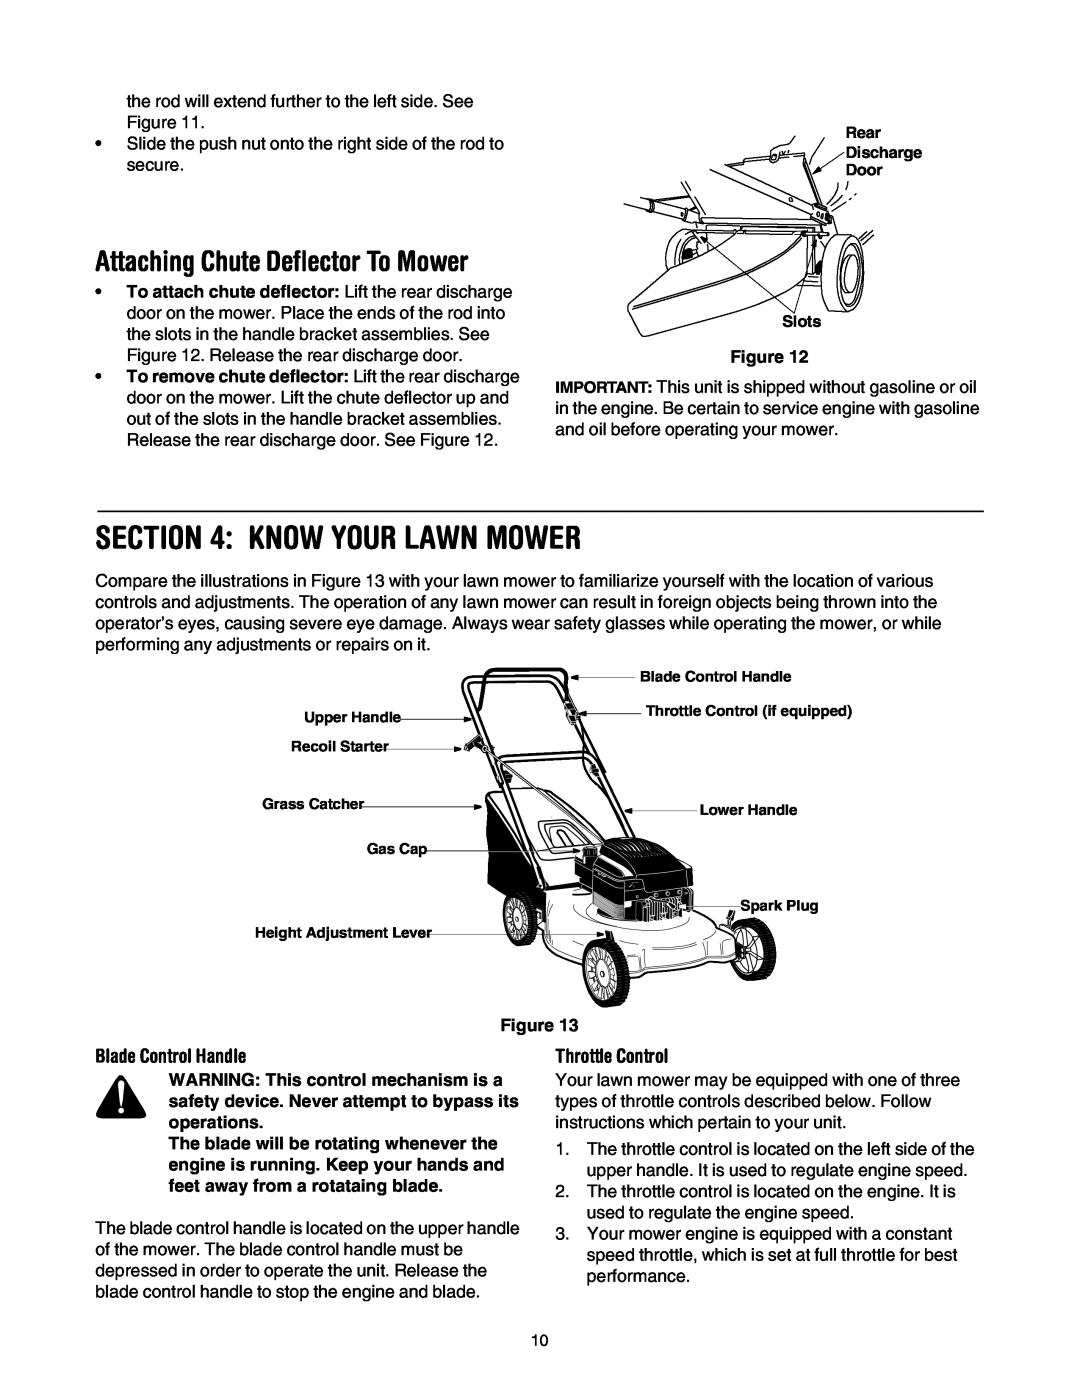 Yard Machines through 429, 410 manual Know Your Lawn Mower, Attaching Chute Deflector To Mower, Blade Control Handle 